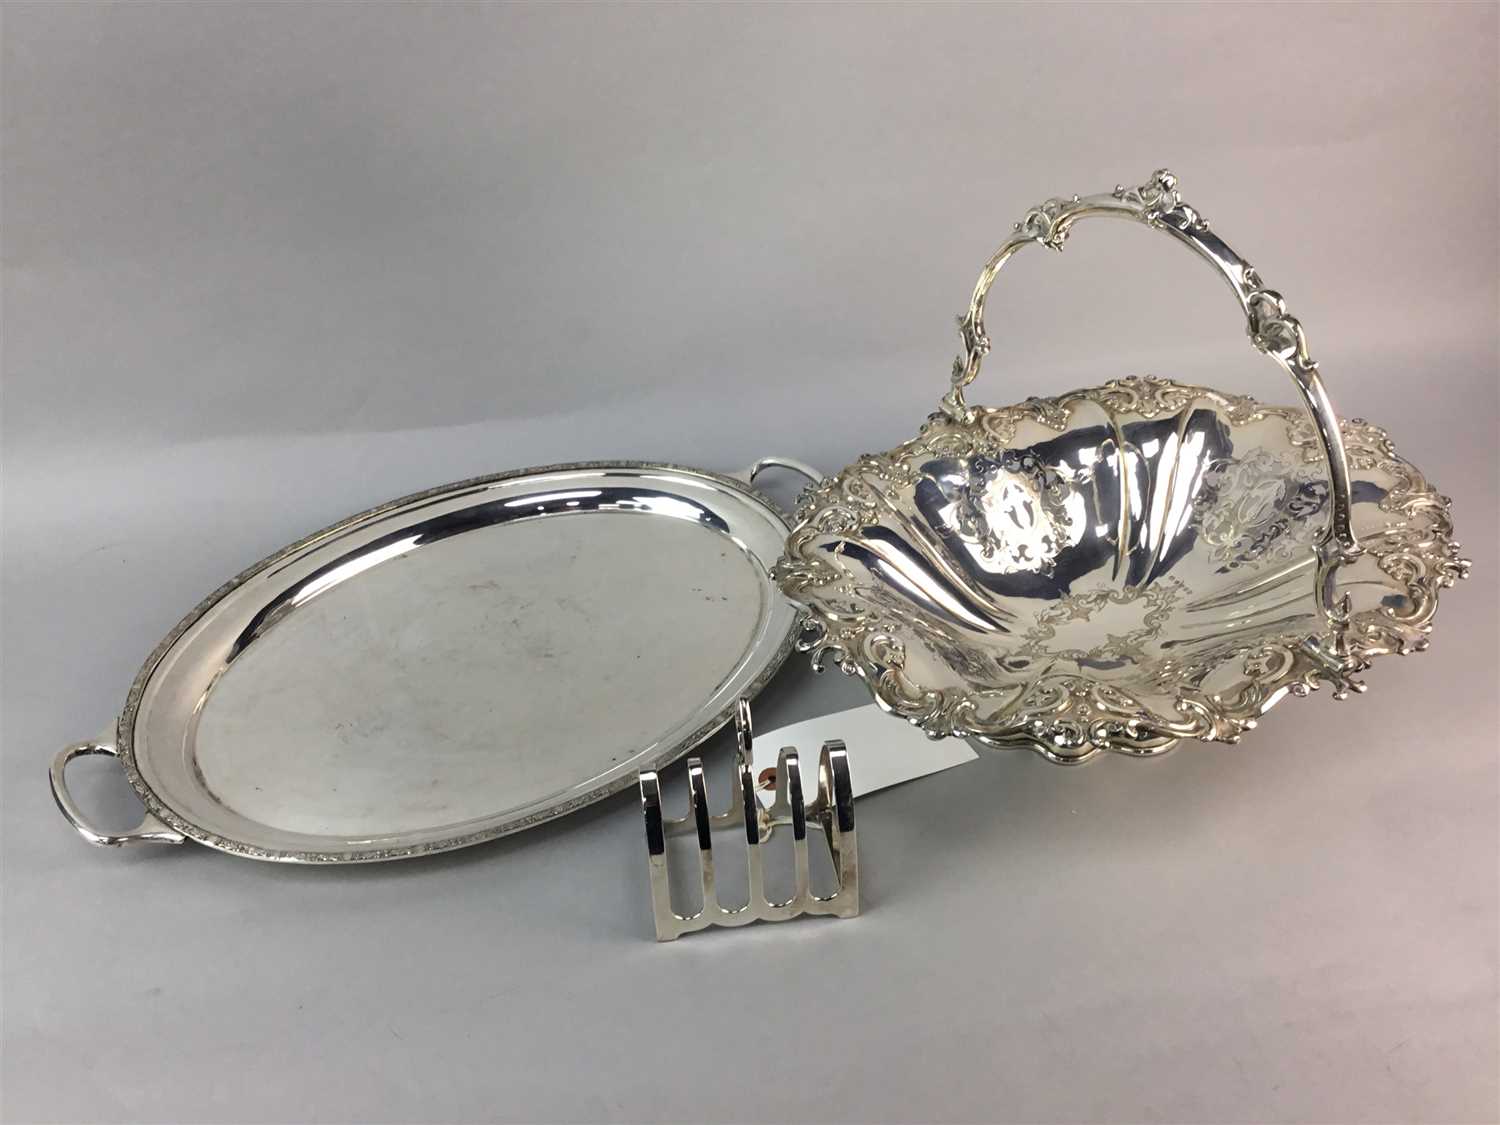 Lot 17 - A SILVER PLATED TRAY, BASKET, TOAST RACK AND OTHER PLATED WARES